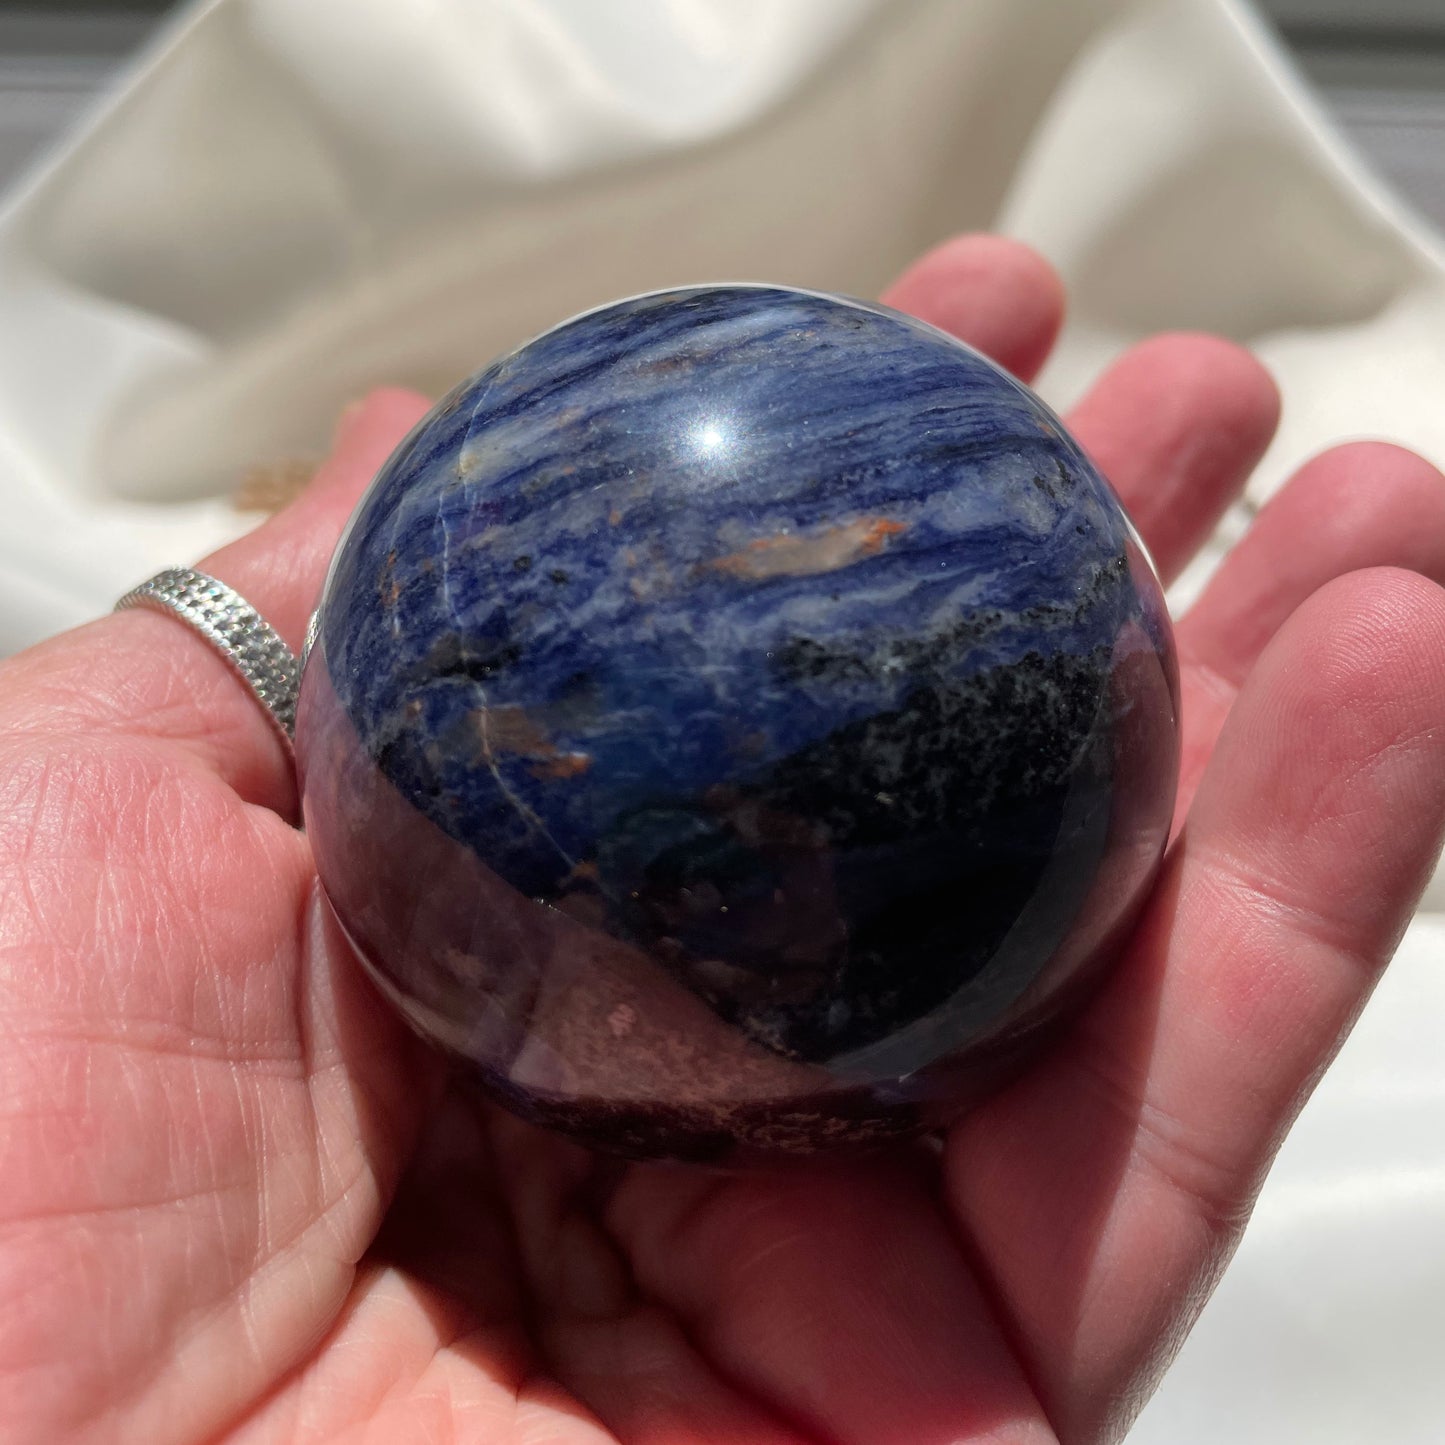 Sodalite Sphere Natural Crystal Blue Marbled 2.33 inches